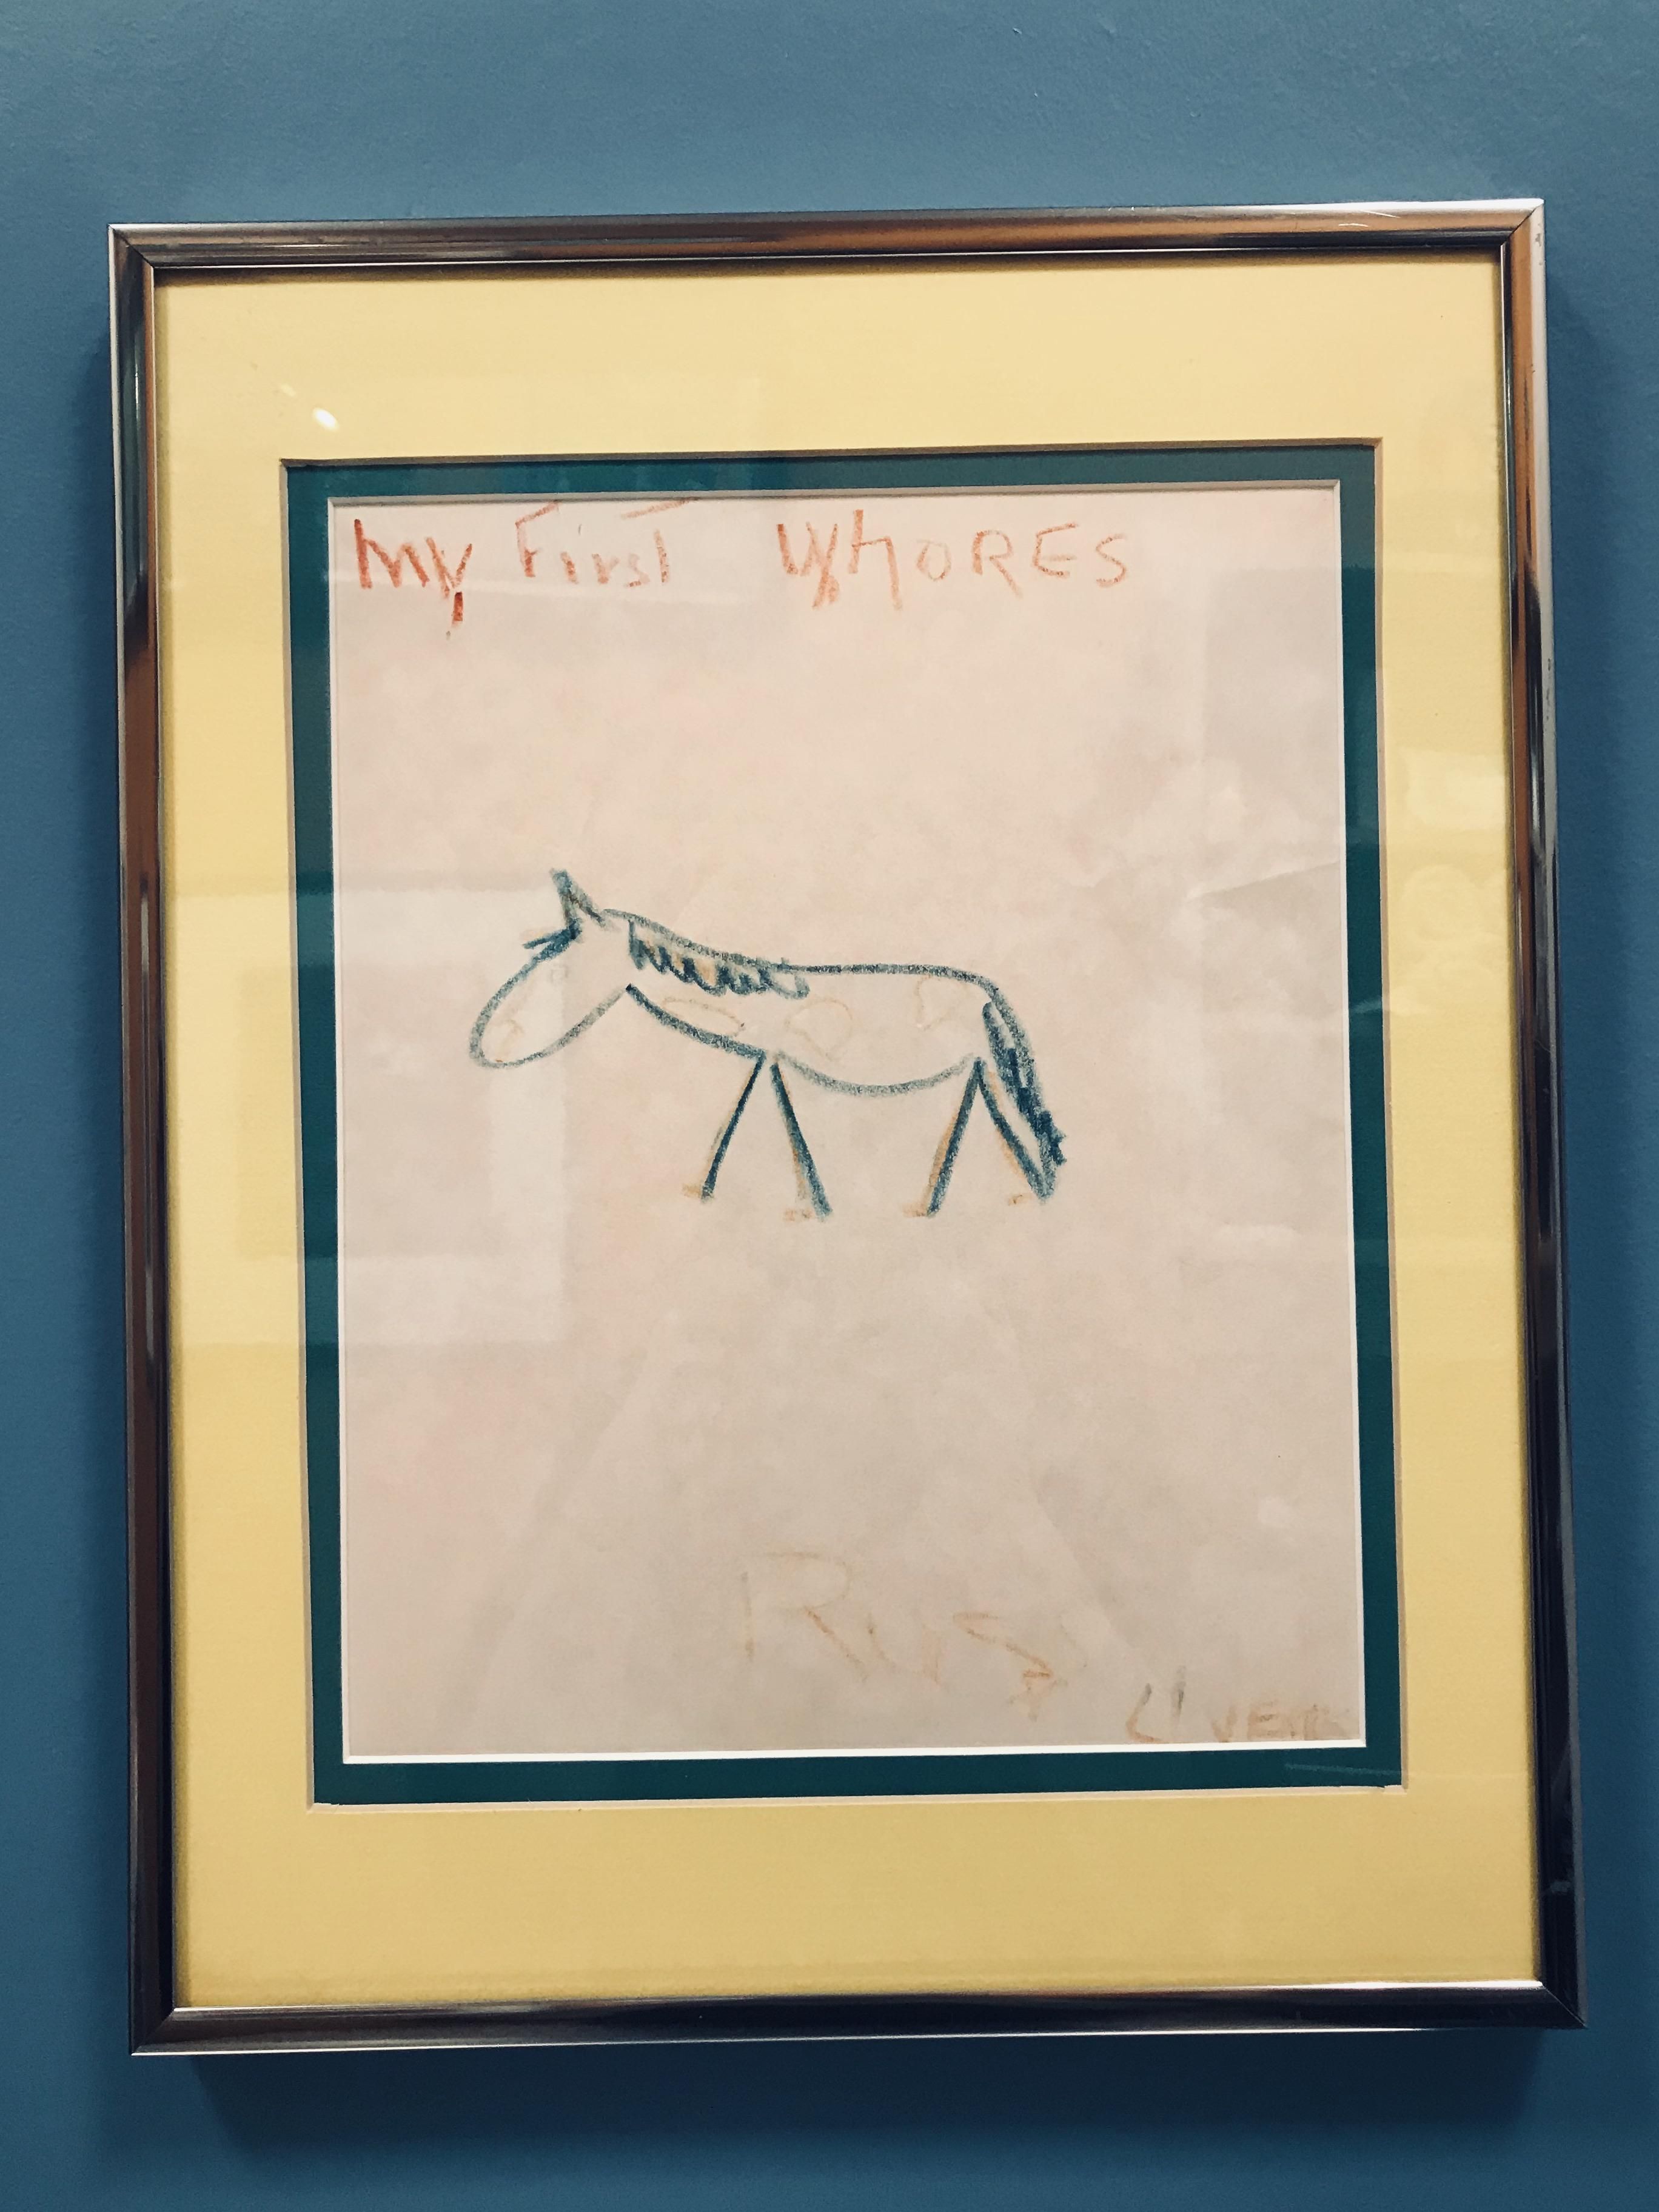 Found this hanging up at my vet’s office.